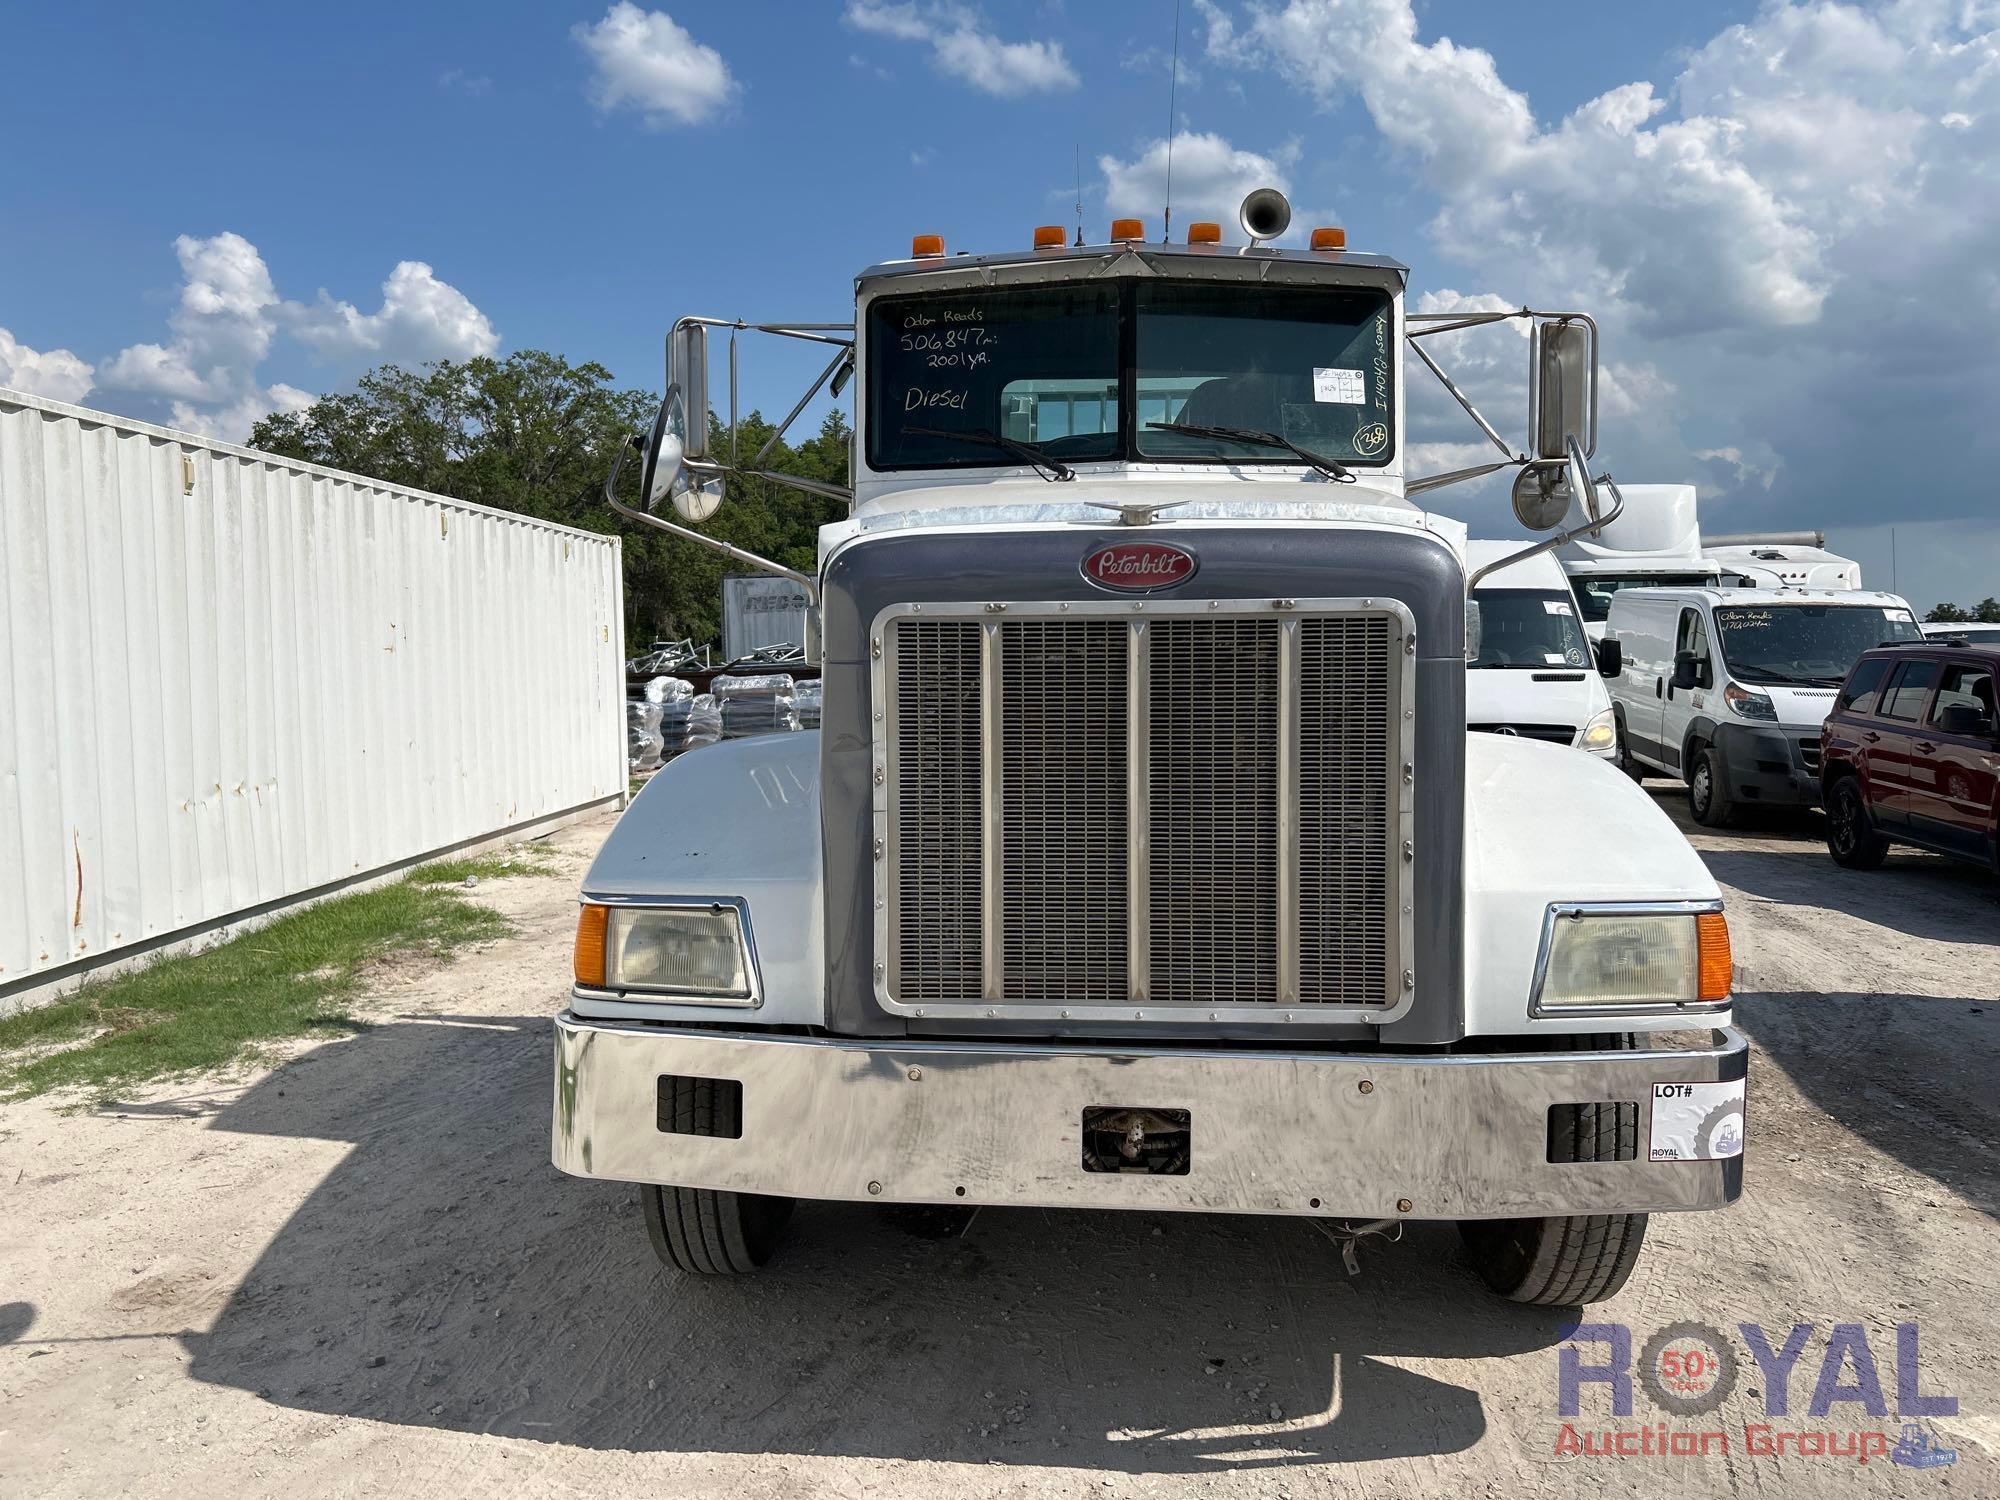 2001 Peterbilt 385 T/A Daycab Truck Tractor